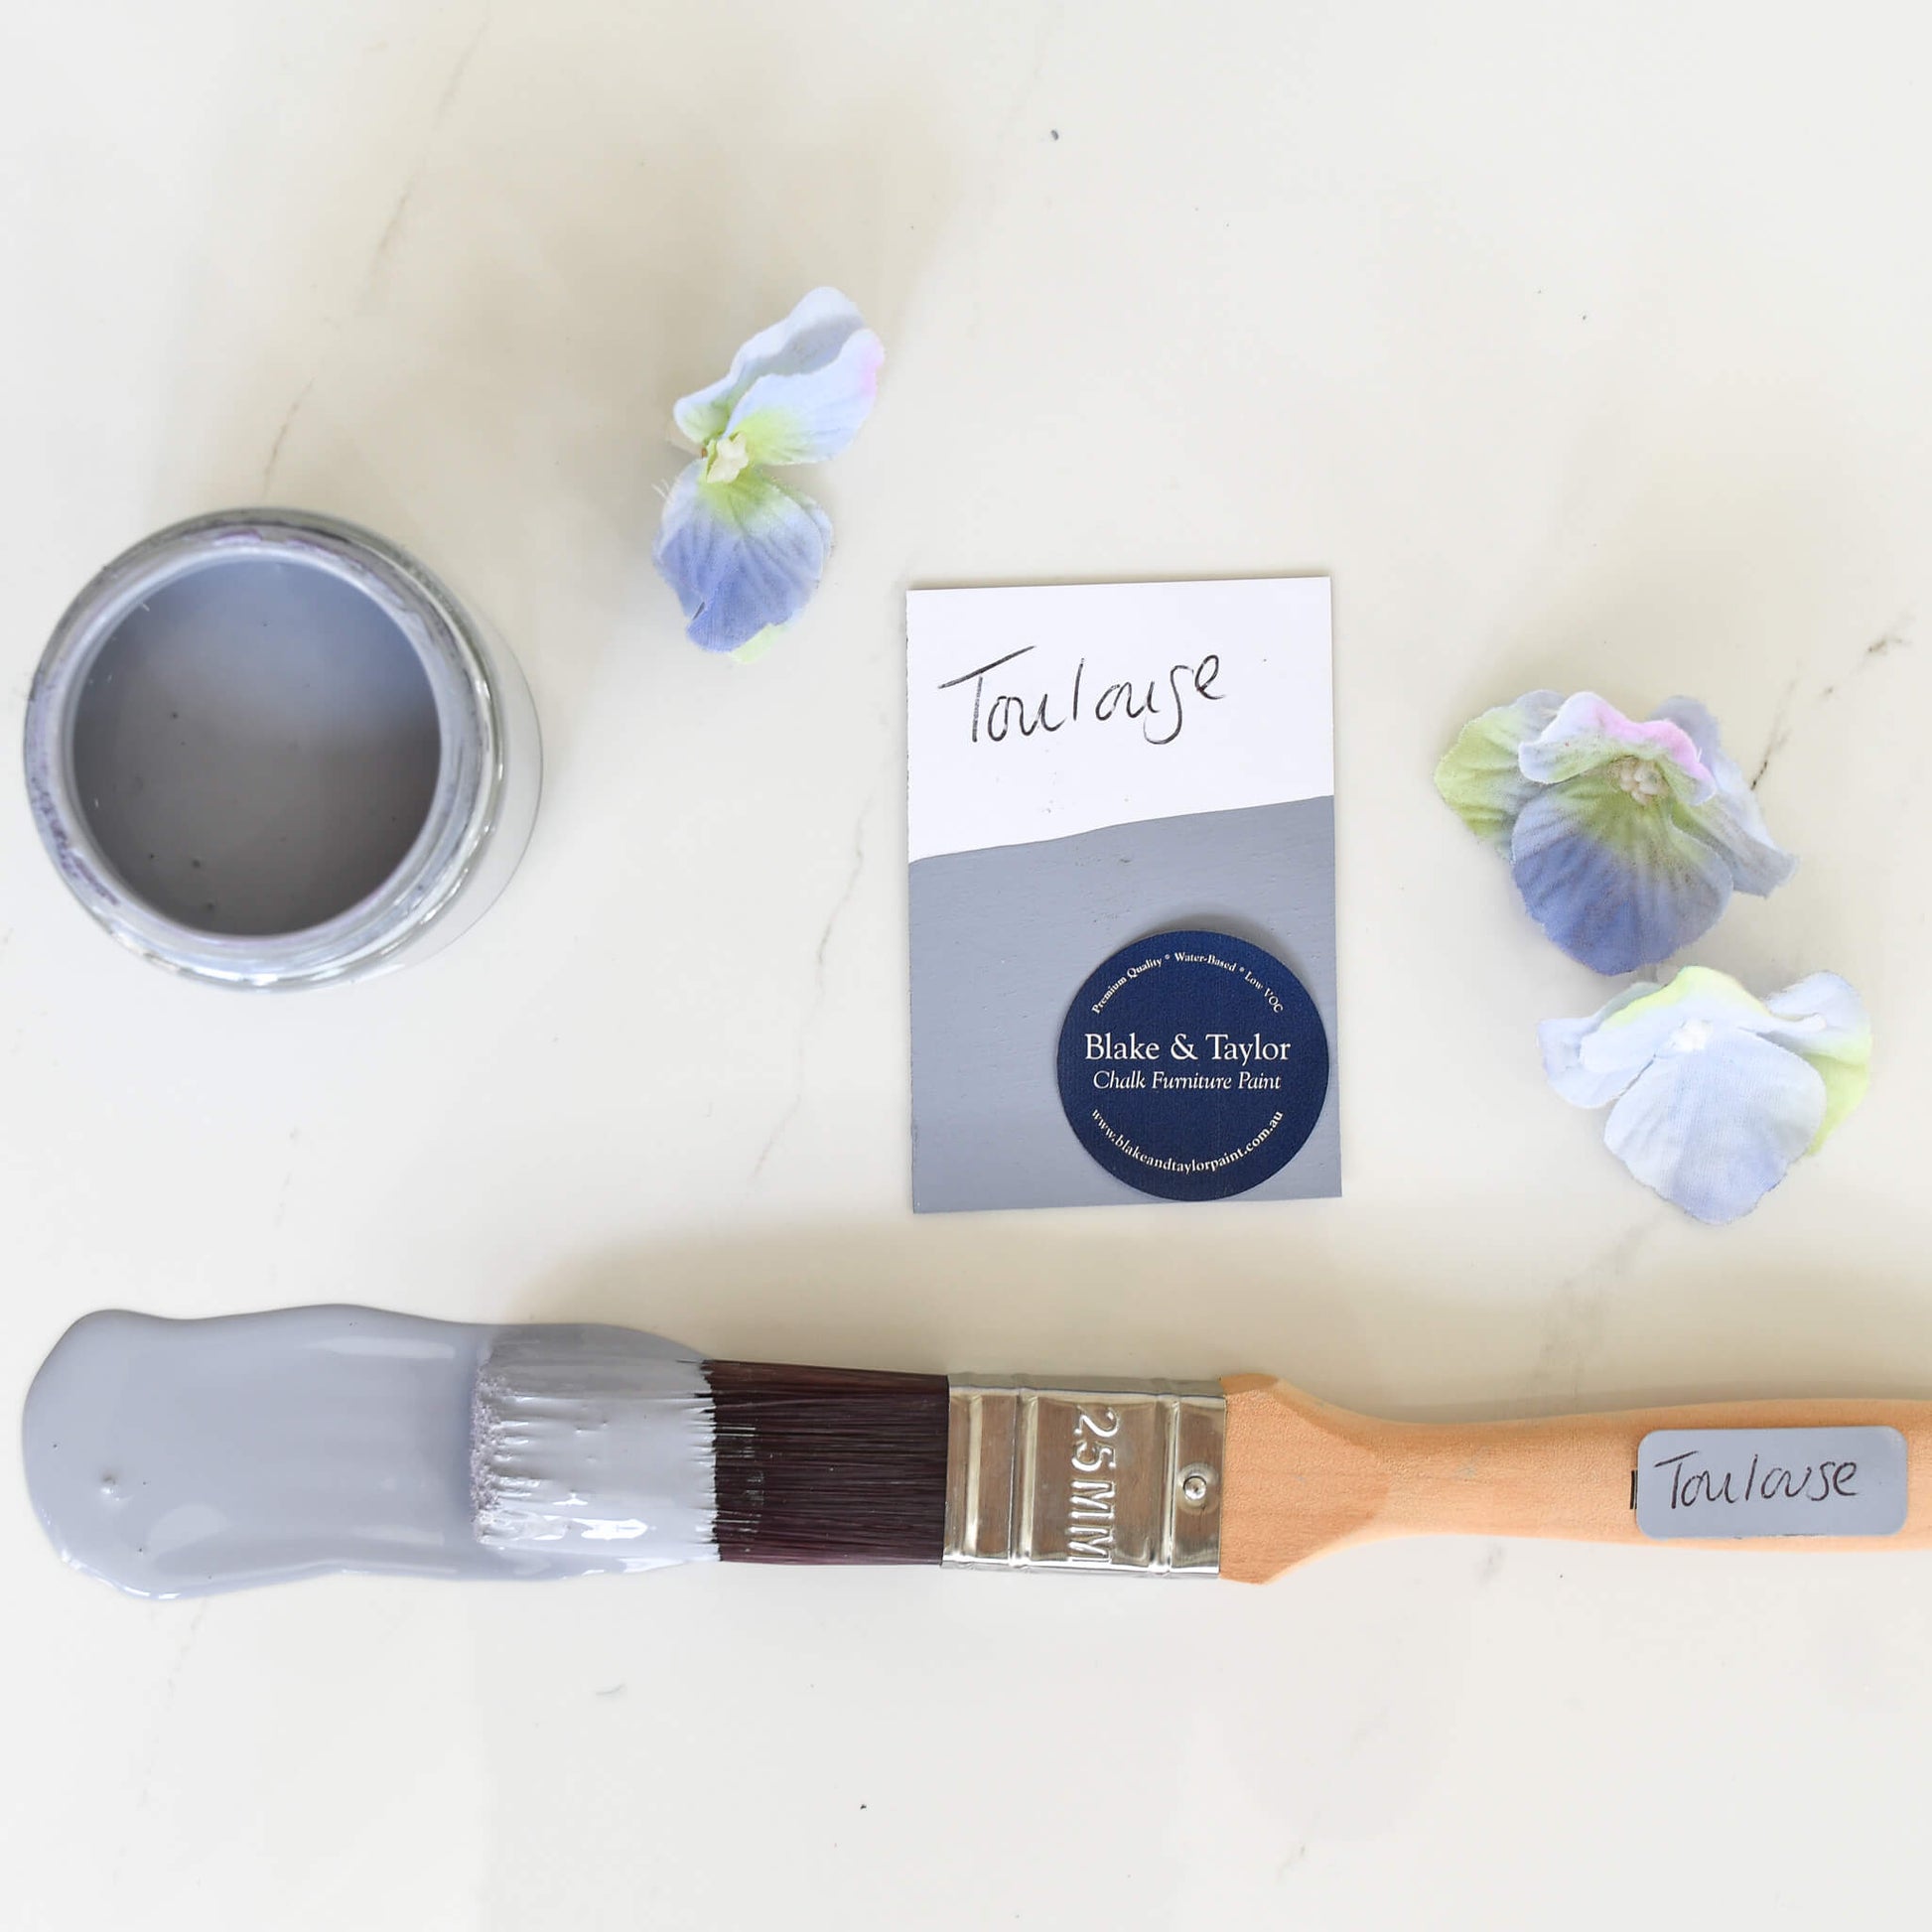 paint brush dipped in 120ml pot of Blake & Taylor Toulouse Chalk Furniture Paint